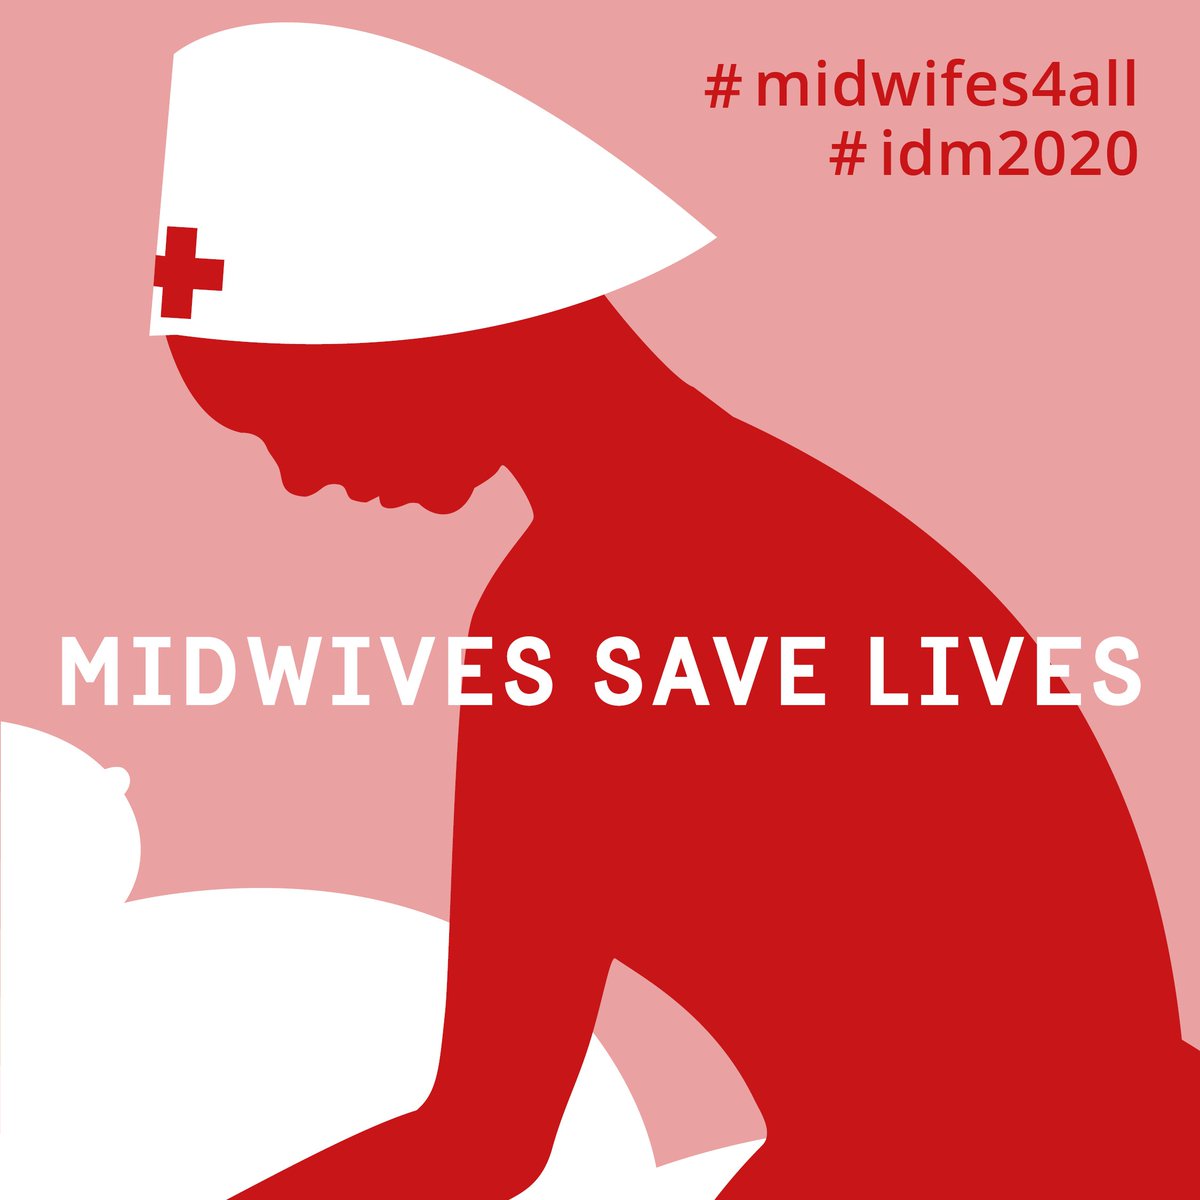 Midwives save lives. That's why Sweden supports their training and work all over the world. Sexual and Reproductive Health and Rights for all is one of the main objectives of Sweden's #FeministForeignPolicy. 
#midwives4all #IDM2020 #srhrandcovid19